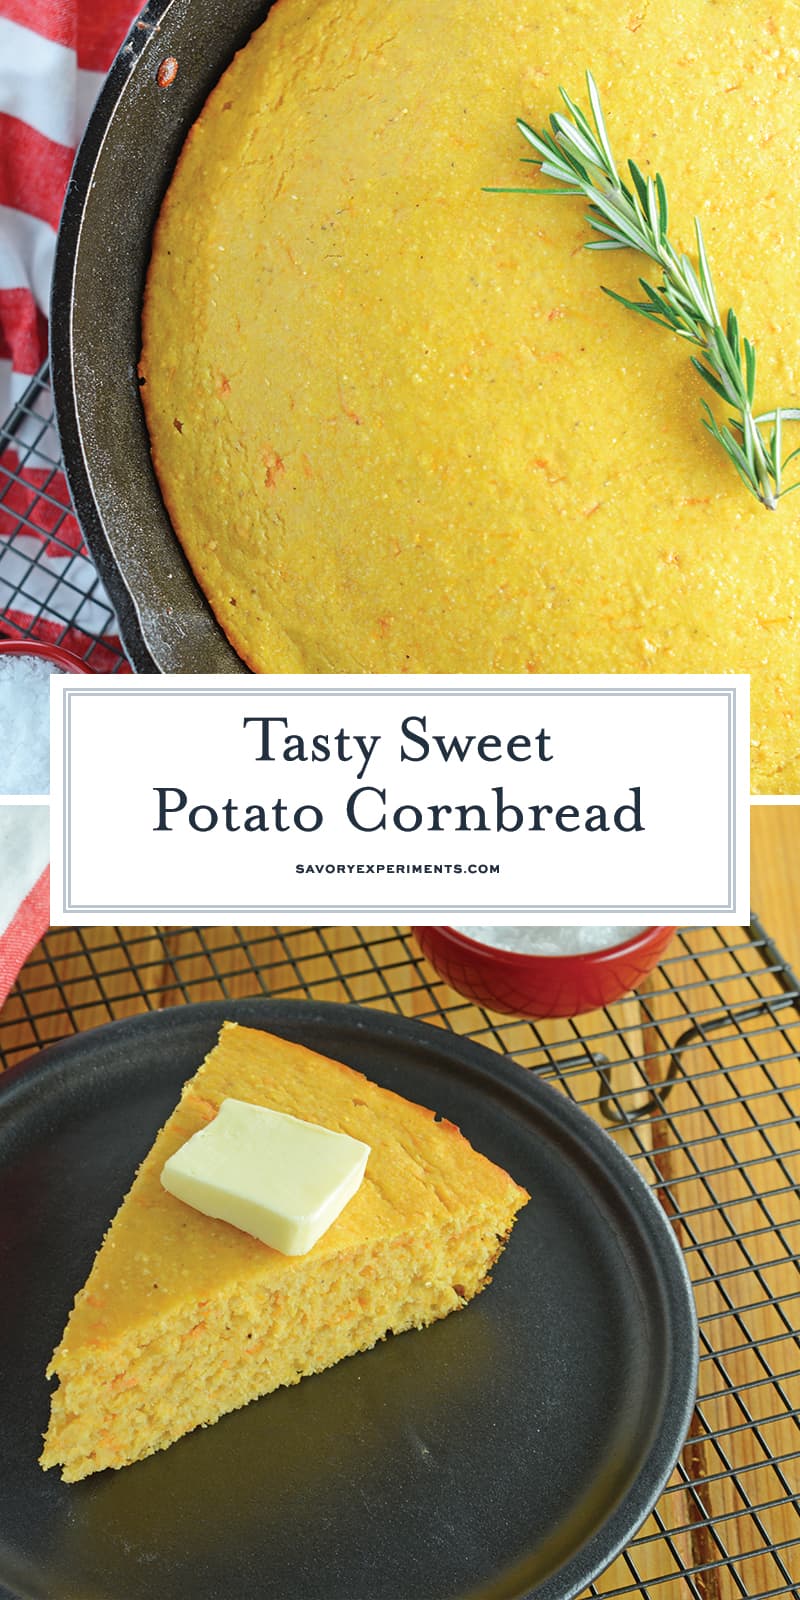 Sweet Potato Cornbread is a combination of two of my favorite fall foods: sweet potatoes and cornbread. Serve with your favorite chili or fried chicken! #sweetpotatocornbread #sweetcornbread www.savoryexperiments.com